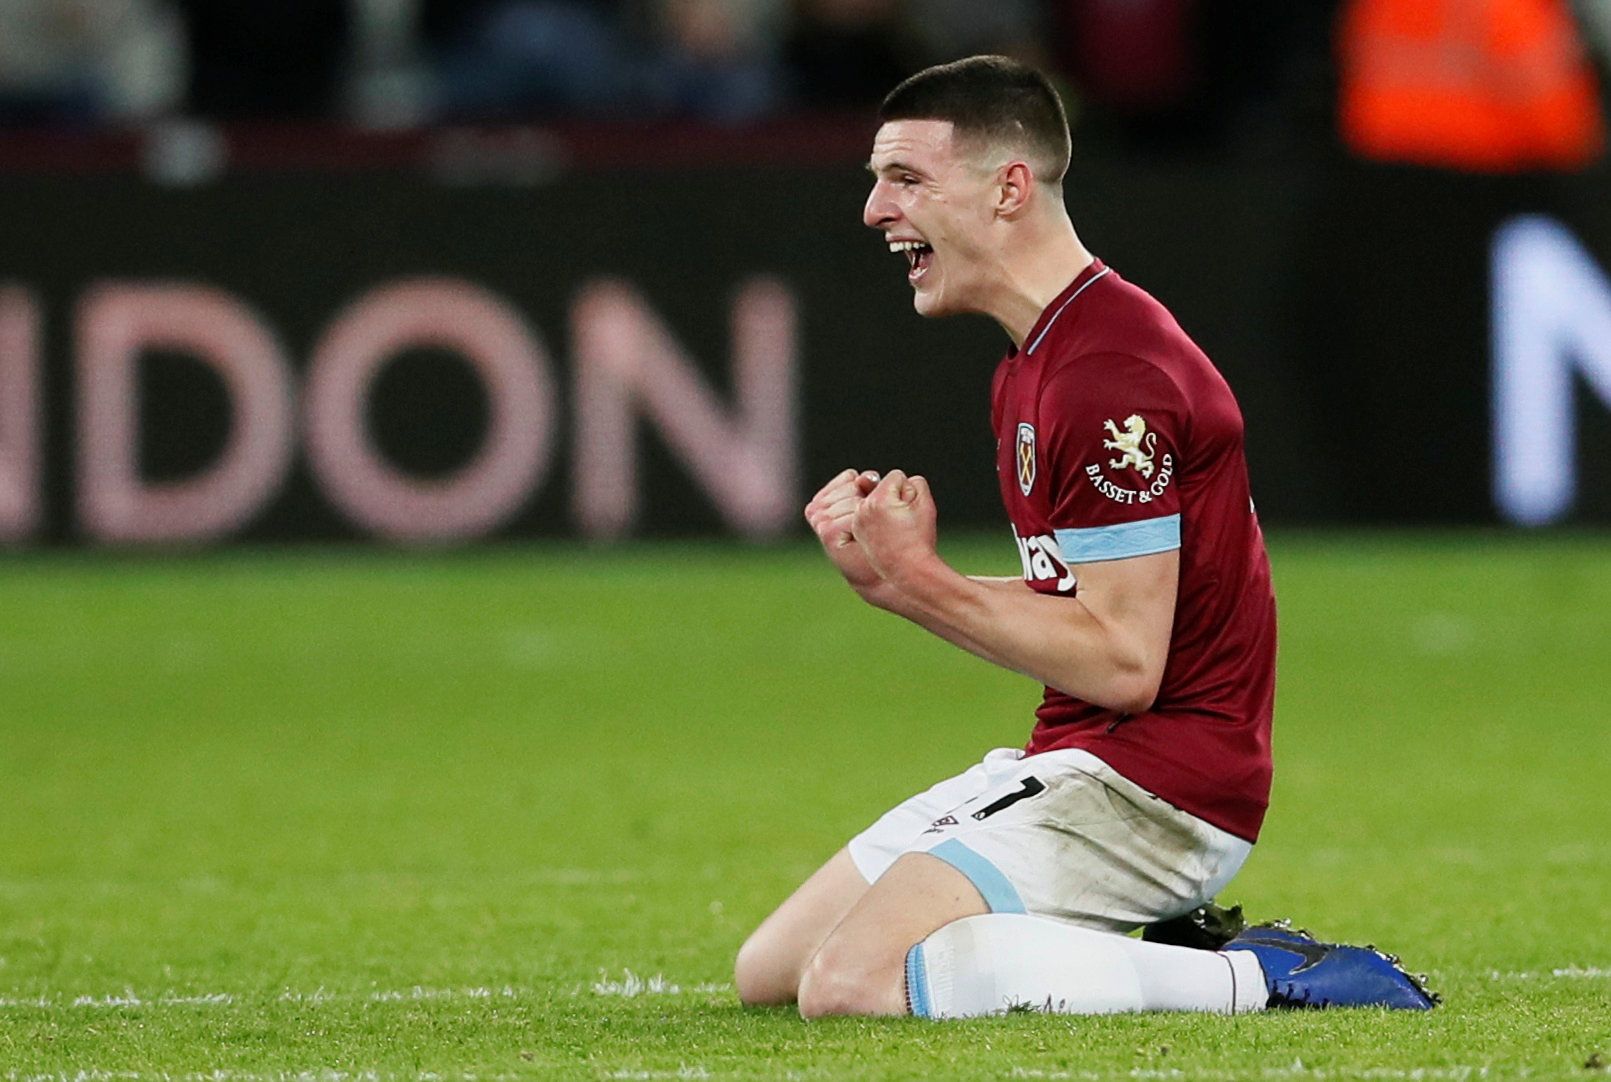 Soccer Football - Premier League - West Ham United v Crystal Palace - London Stadium, London, Britain - December 8, 2018  West Ham's Declan Rice celebrates after the match    REUTERS/David Klein  EDITORIAL USE ONLY. No use with unauthorized audio, video, data, fixture lists, club/league logos or 